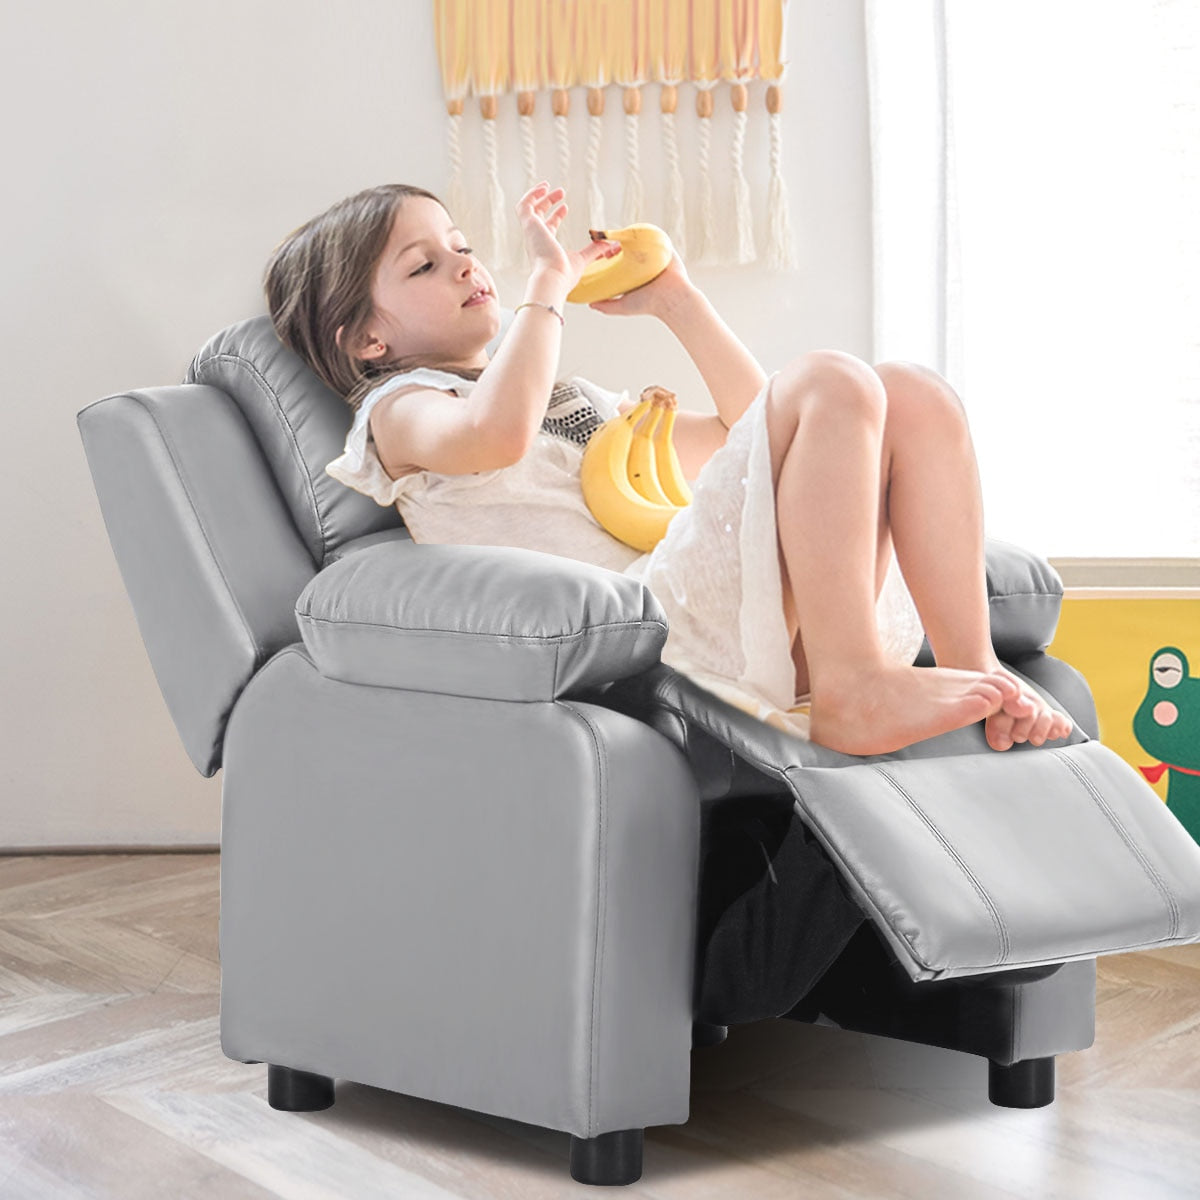 Kids Recliner Chair - Deluxe Padded Gray